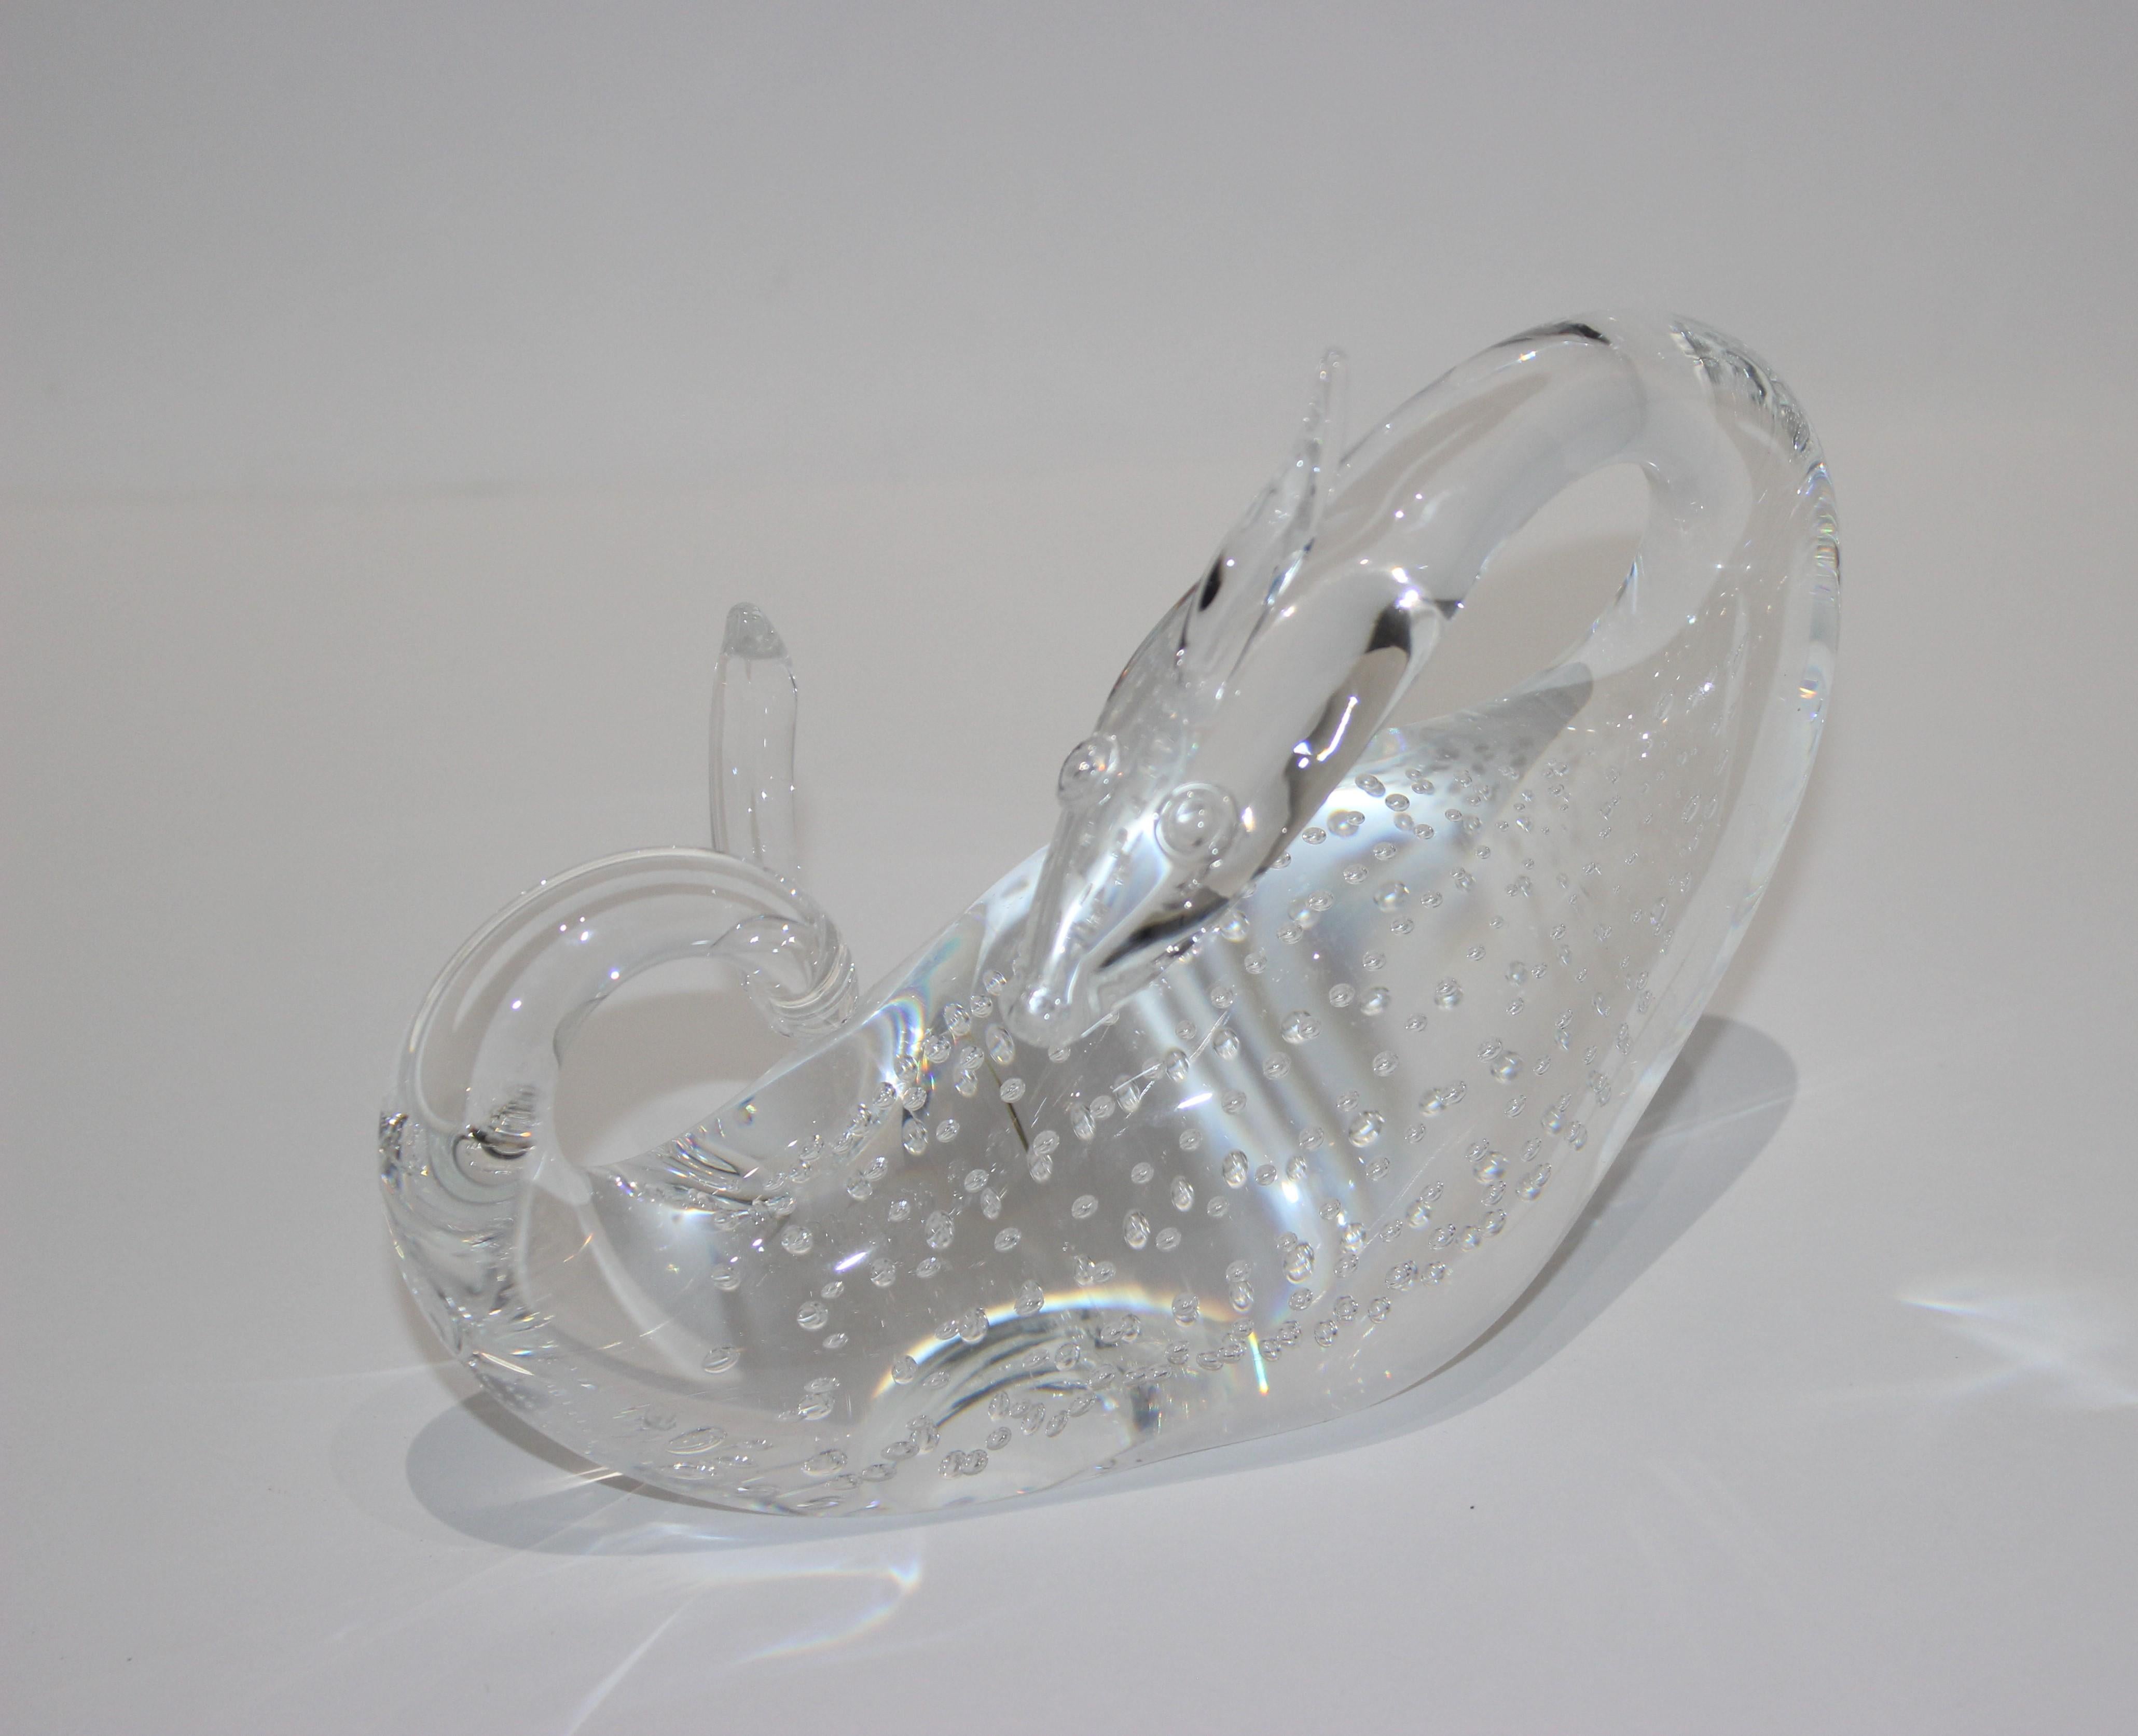 Clear glass dragon controlled bubble by Steuben.
Signed on verso.